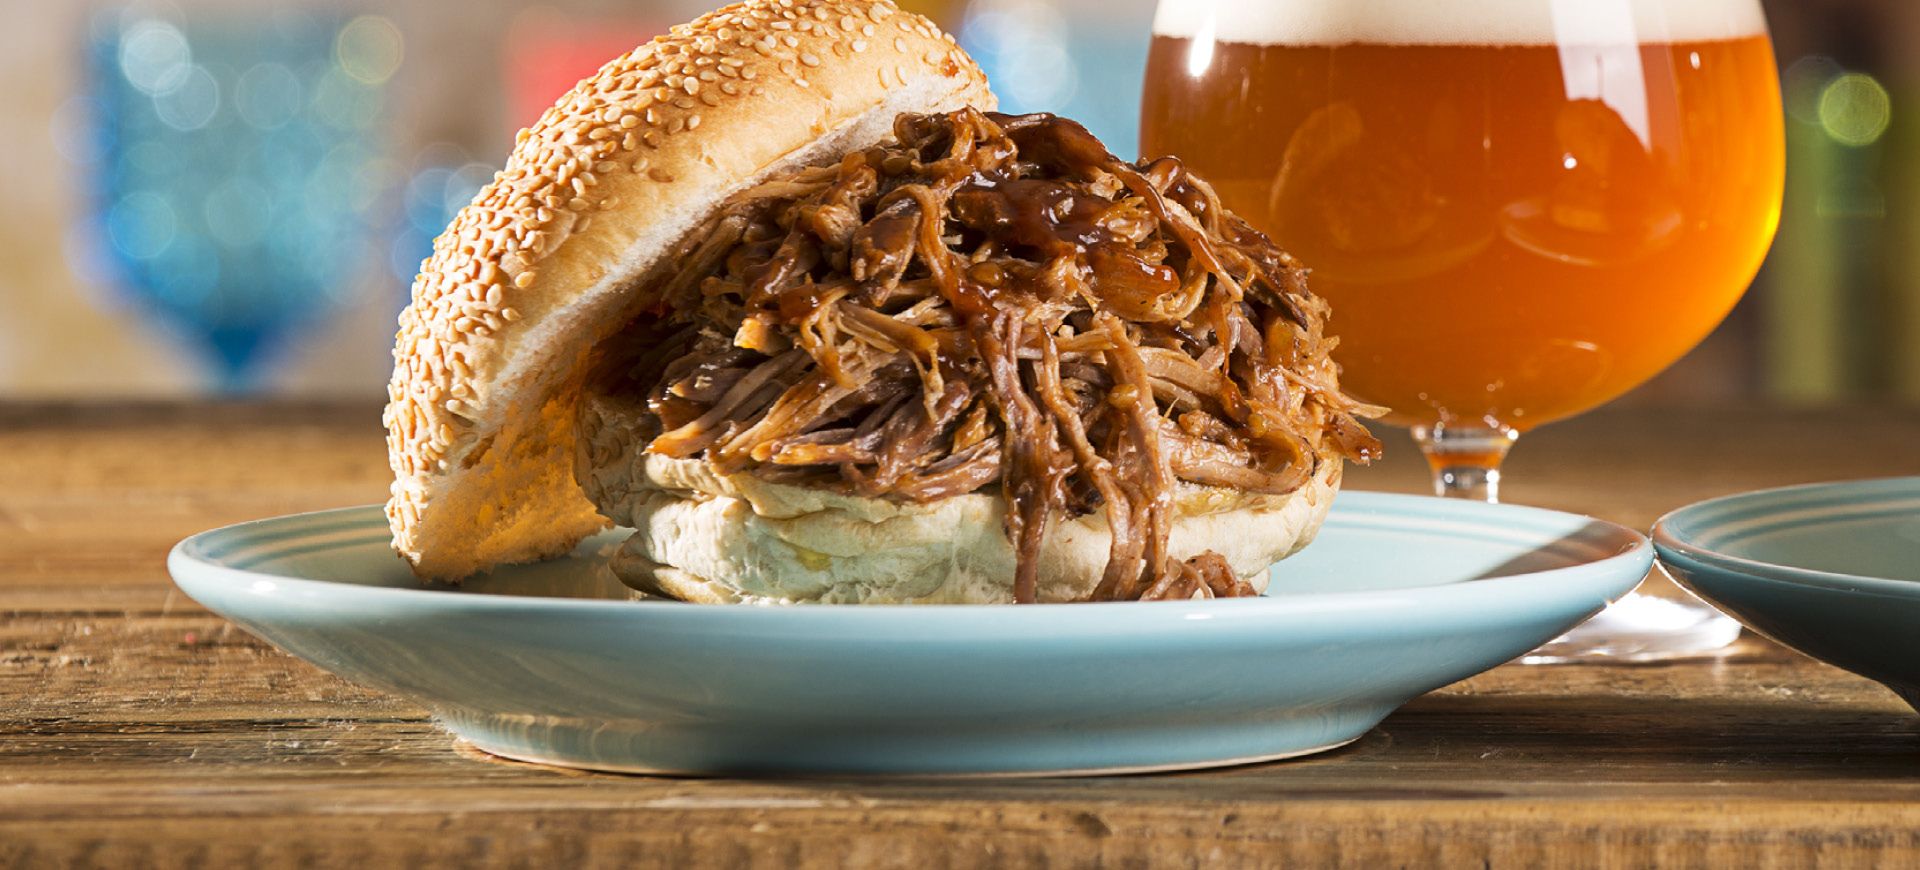 Grilled Pulled Pork with Bourbon Whiskey Barbecue Sauce